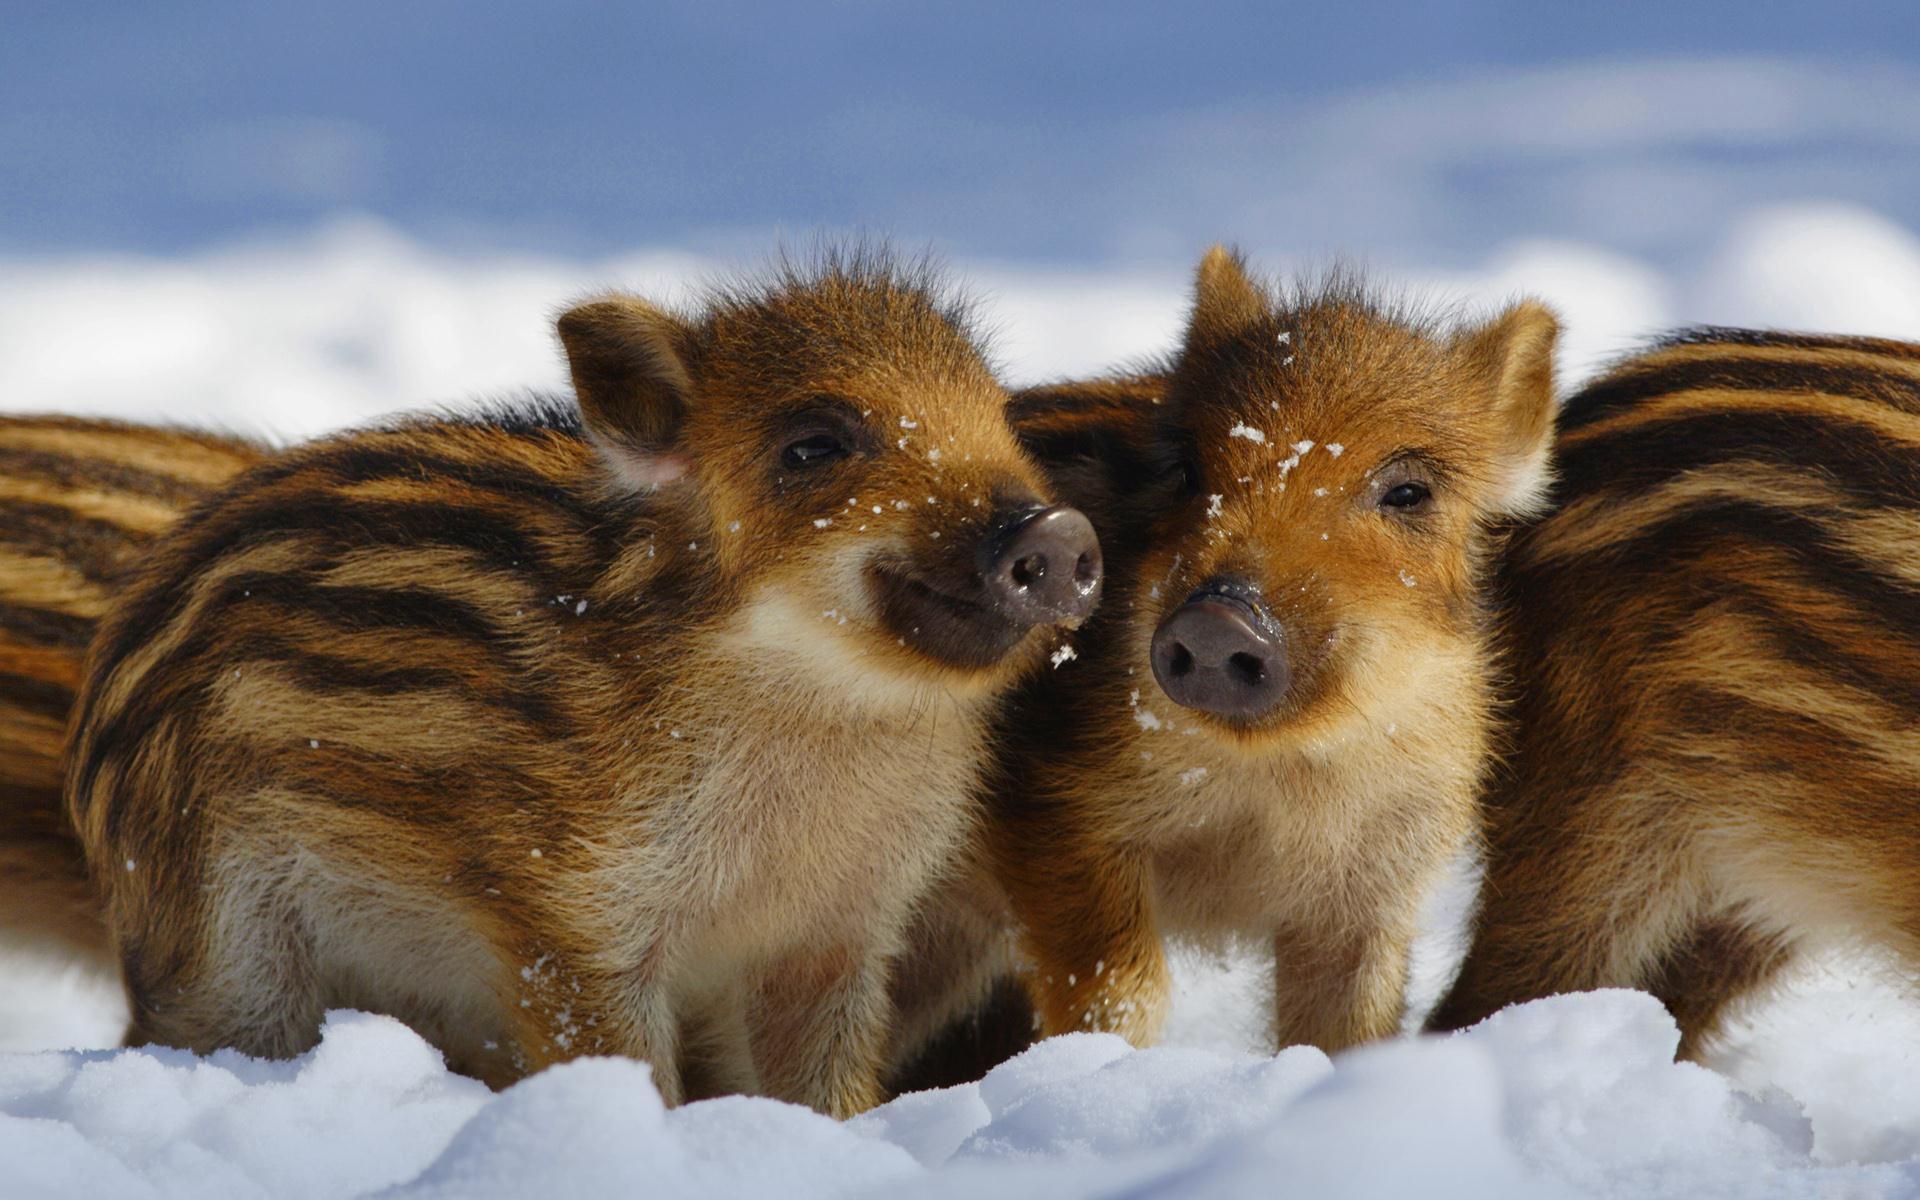 Wild pigs wallpaper and image, picture, photo